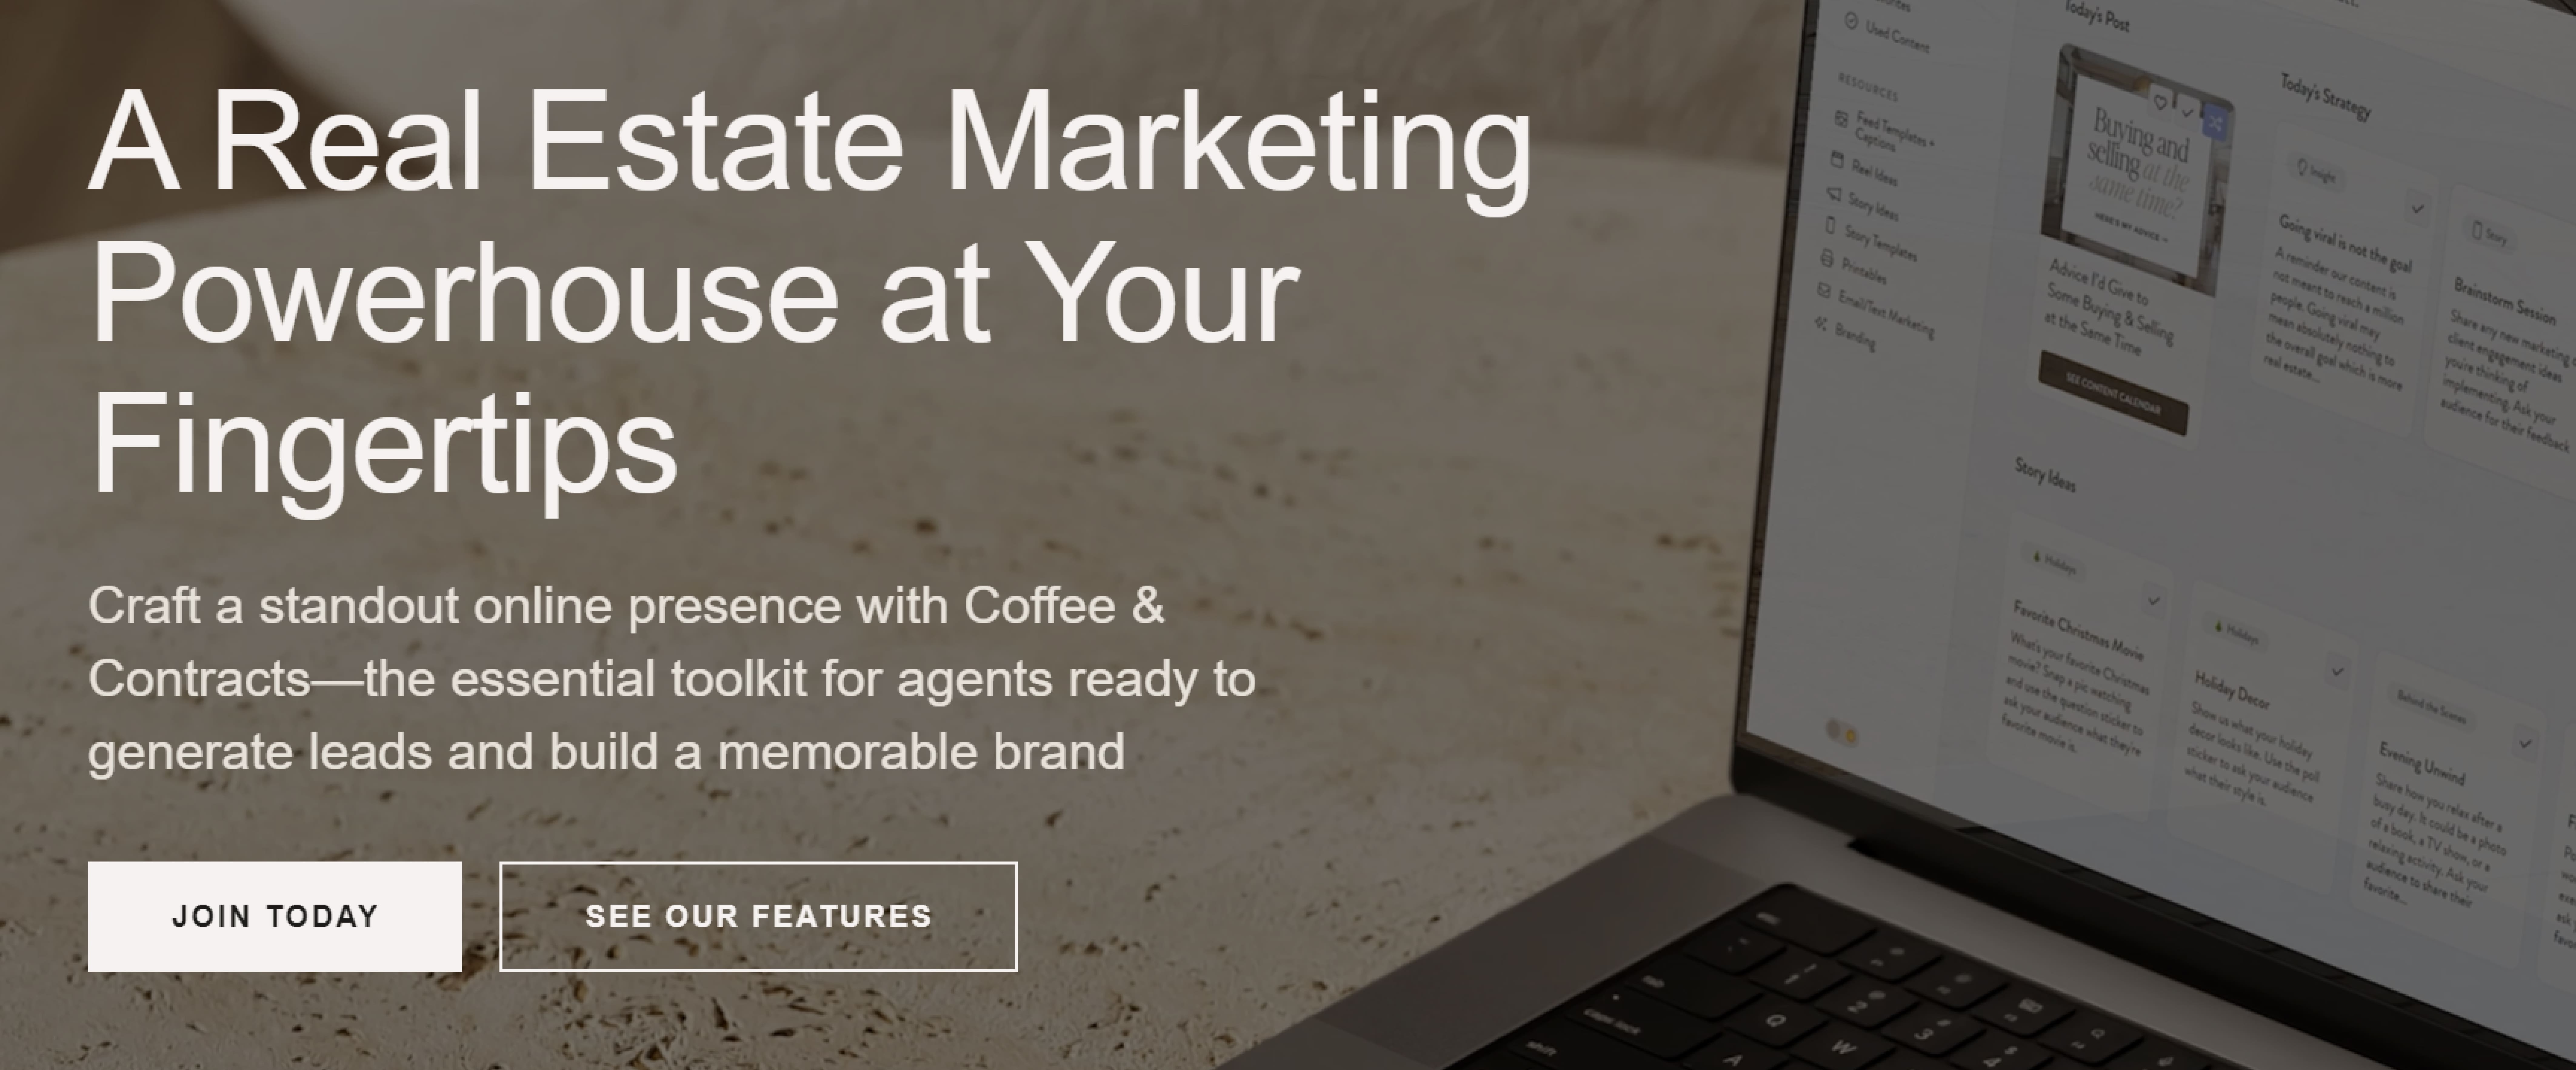 Coffee & Contracts is a great tool for a real estate social media manager